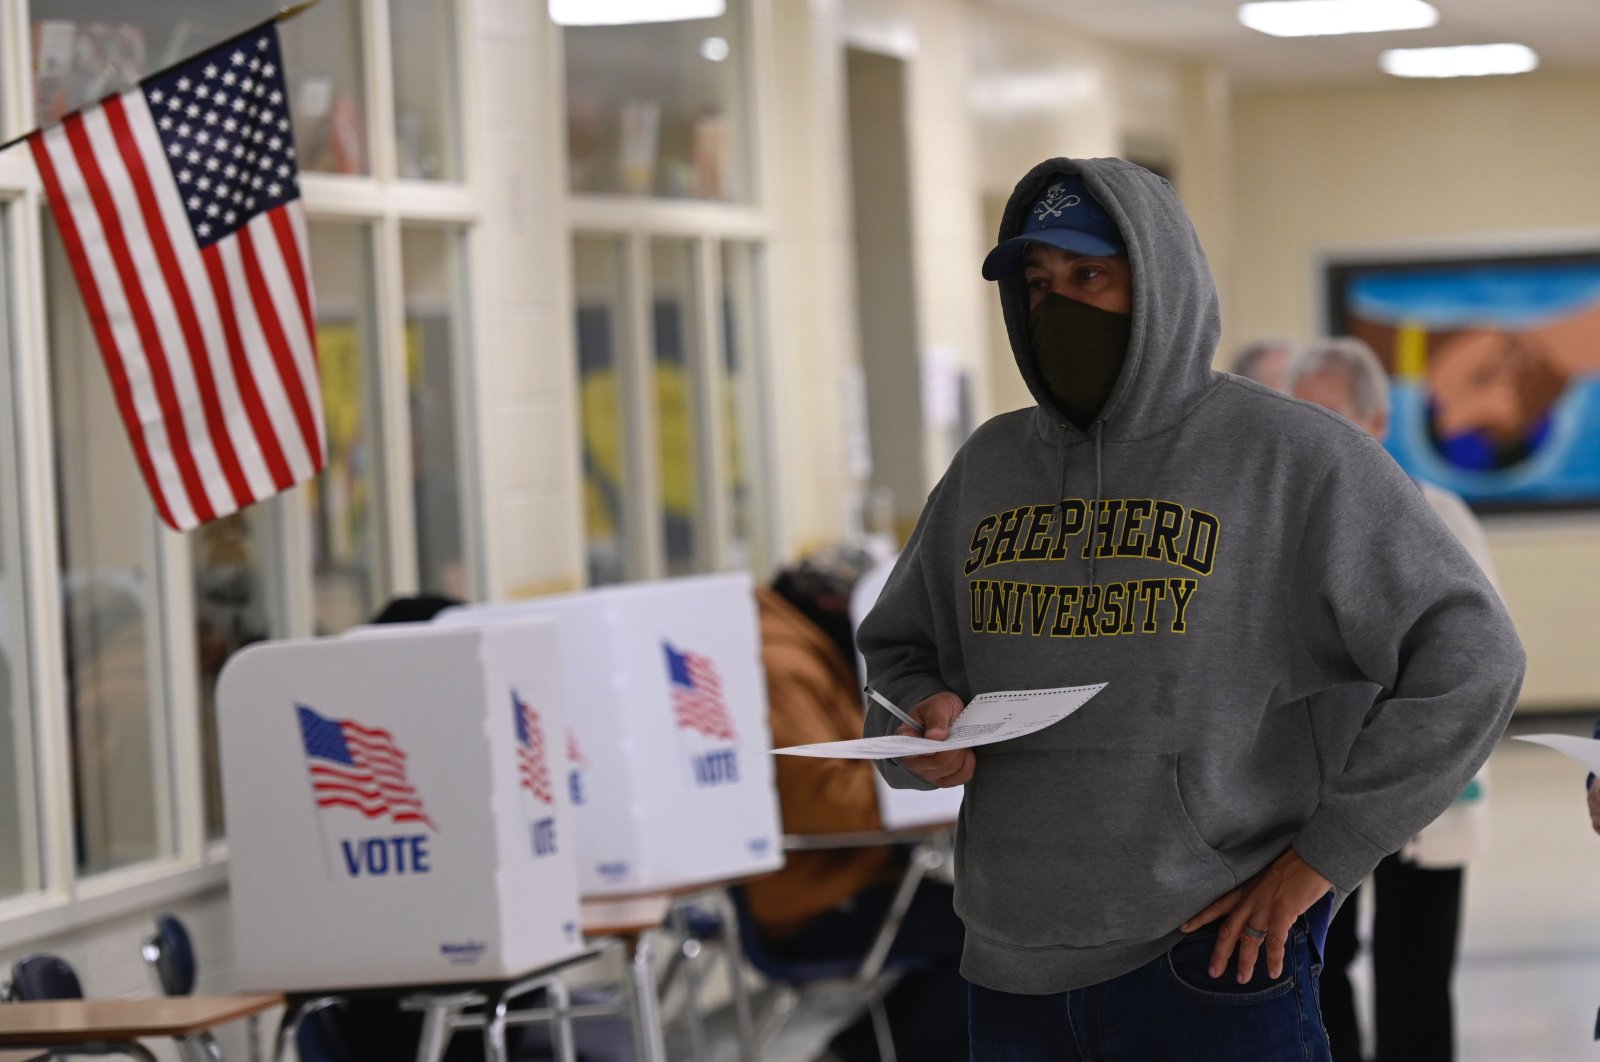 A voters casts his ballot at a polling station on U.S. Election Day in Winchester, Virginia, Nov. 3, 2020. (AFP Photo)